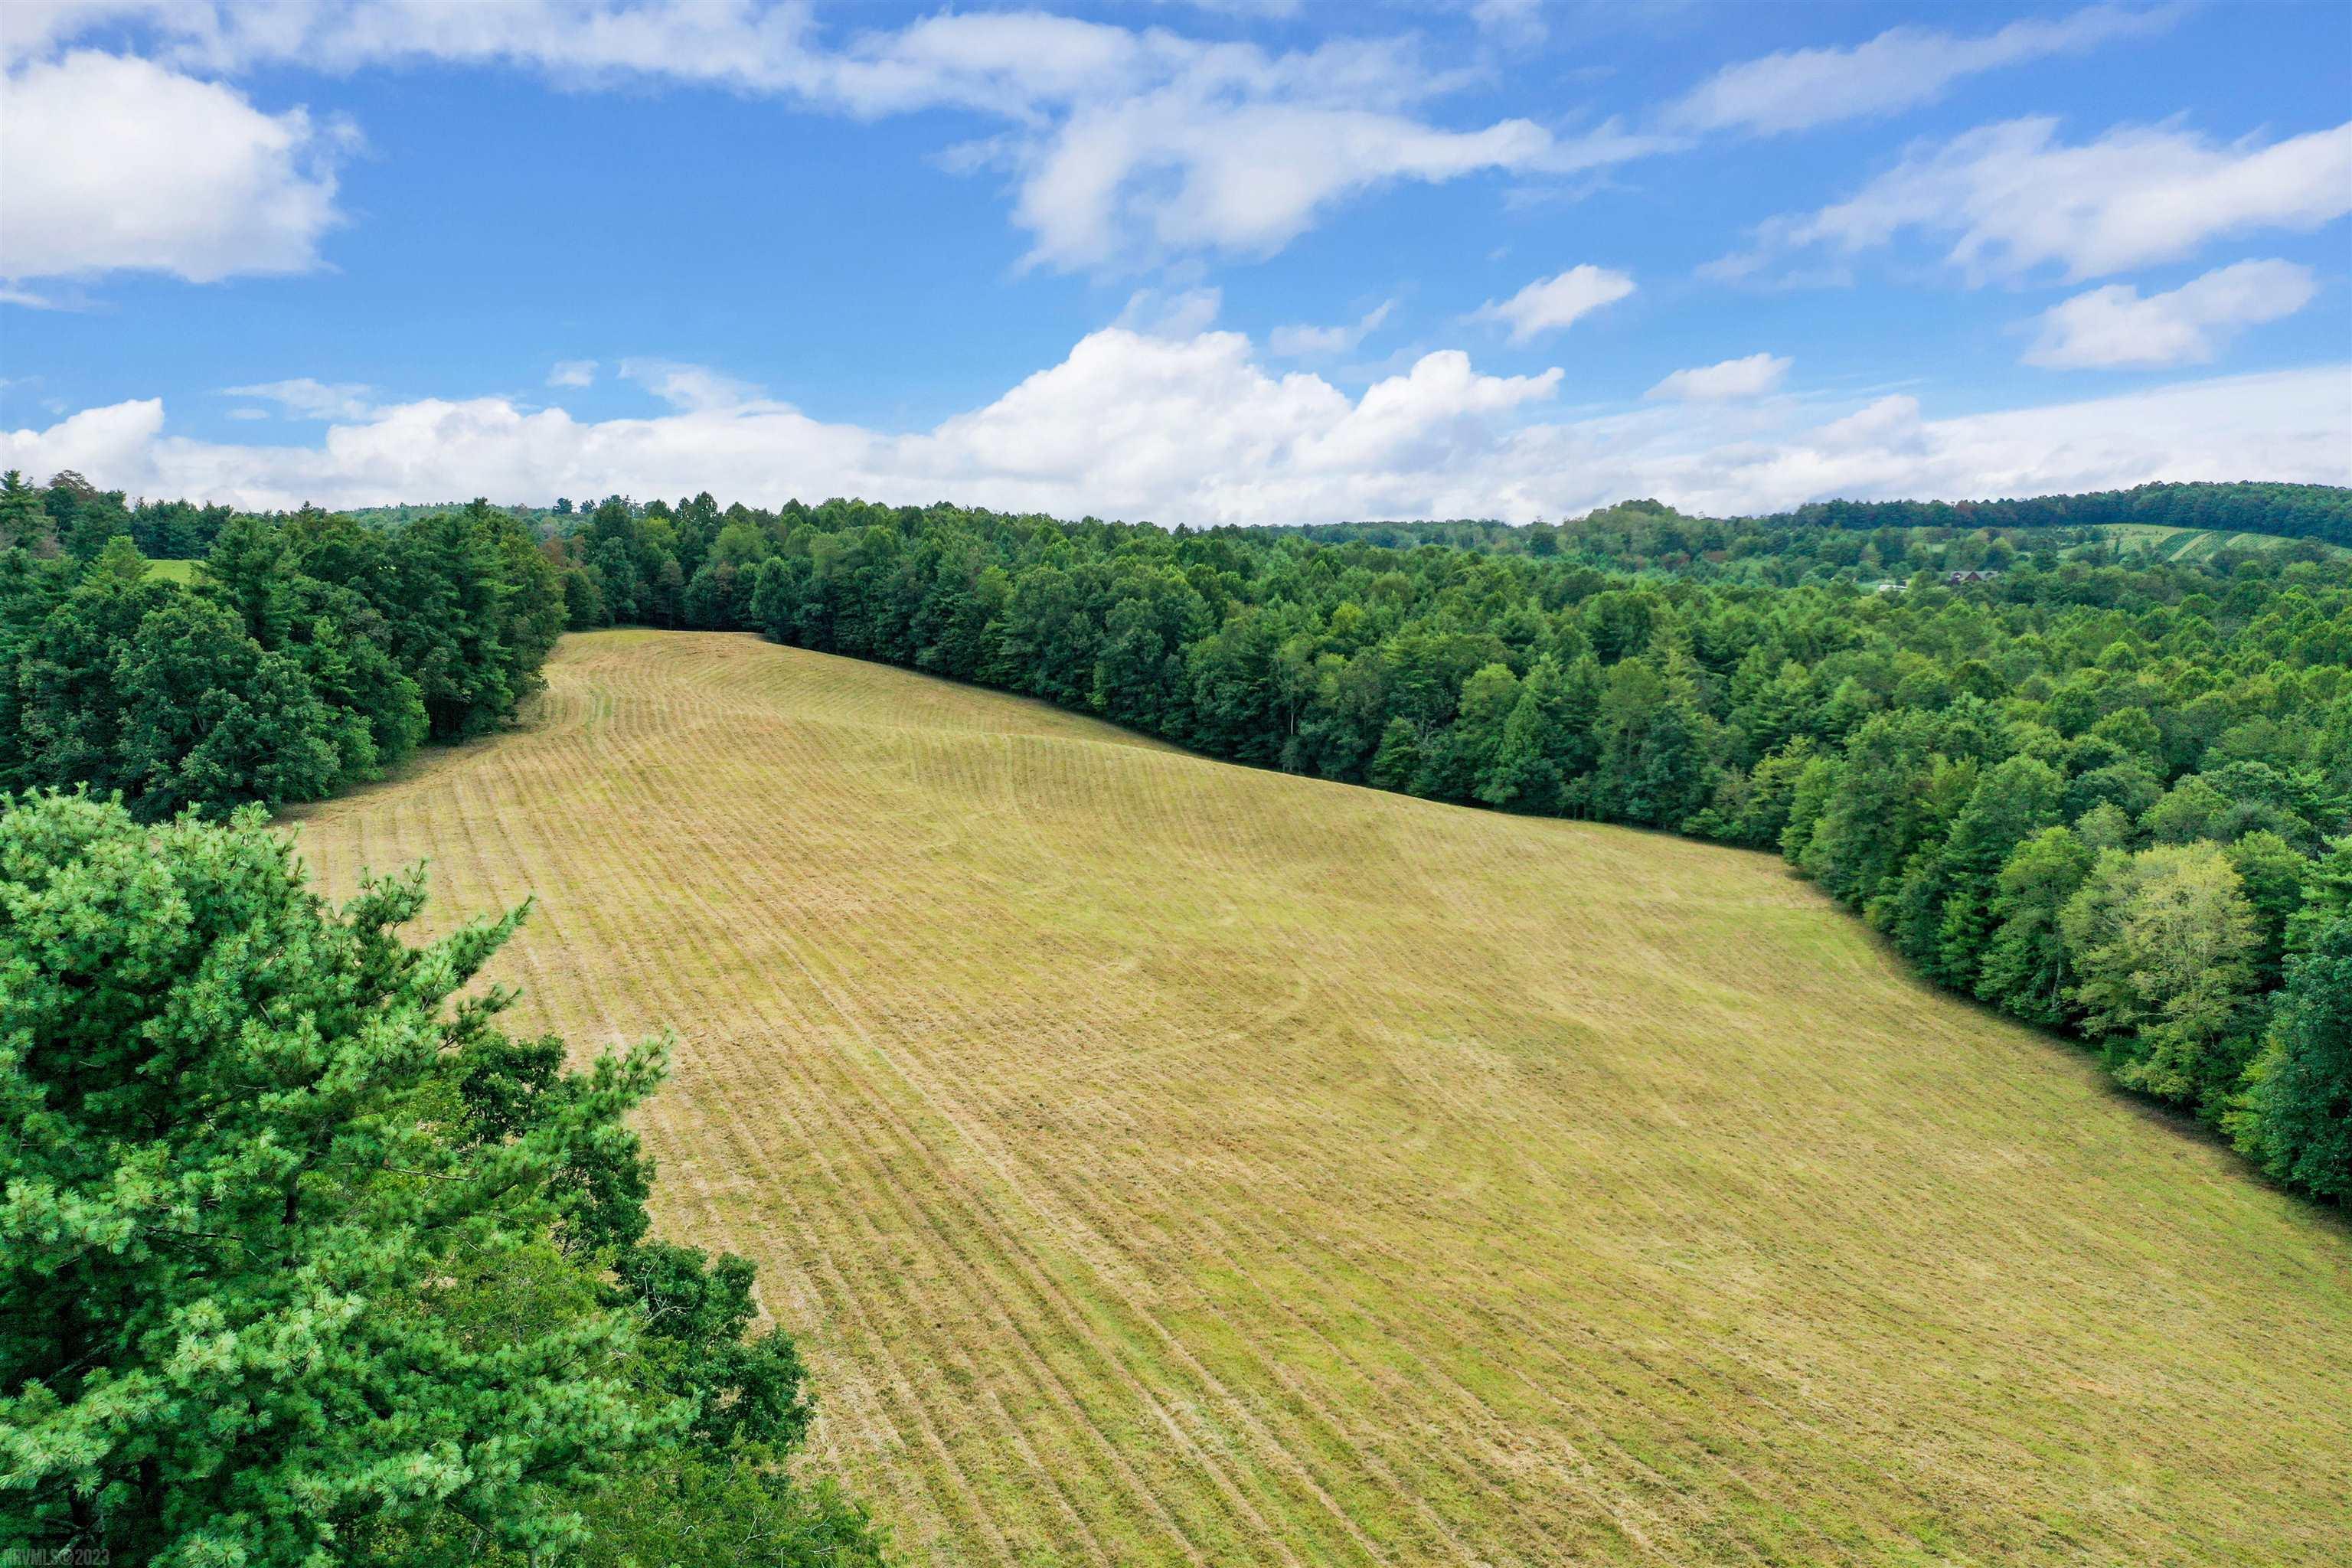 The "Wade Farm" consists of 2 tracts, 22 ac and 44 ac, which could be bought either individually or together. Located in Floyd County, it would make a fantastic small farm or recreation property, with approx. 14 ac cleared and 52 ac in hardwoods, plus multiple springs and branches with over 4,100' of stream frontage. The property could also be perfect for horses or cattle, or for a large garden or orchard. This is a beautiful setting, out in the country, but on a paved, state maintained road (and not too far from the main road), and easy to get to multiple towns. Build a house and take advantage of plenty of wooded acreage for enjoying wildlife. Fiber internet up to a gig speed available!